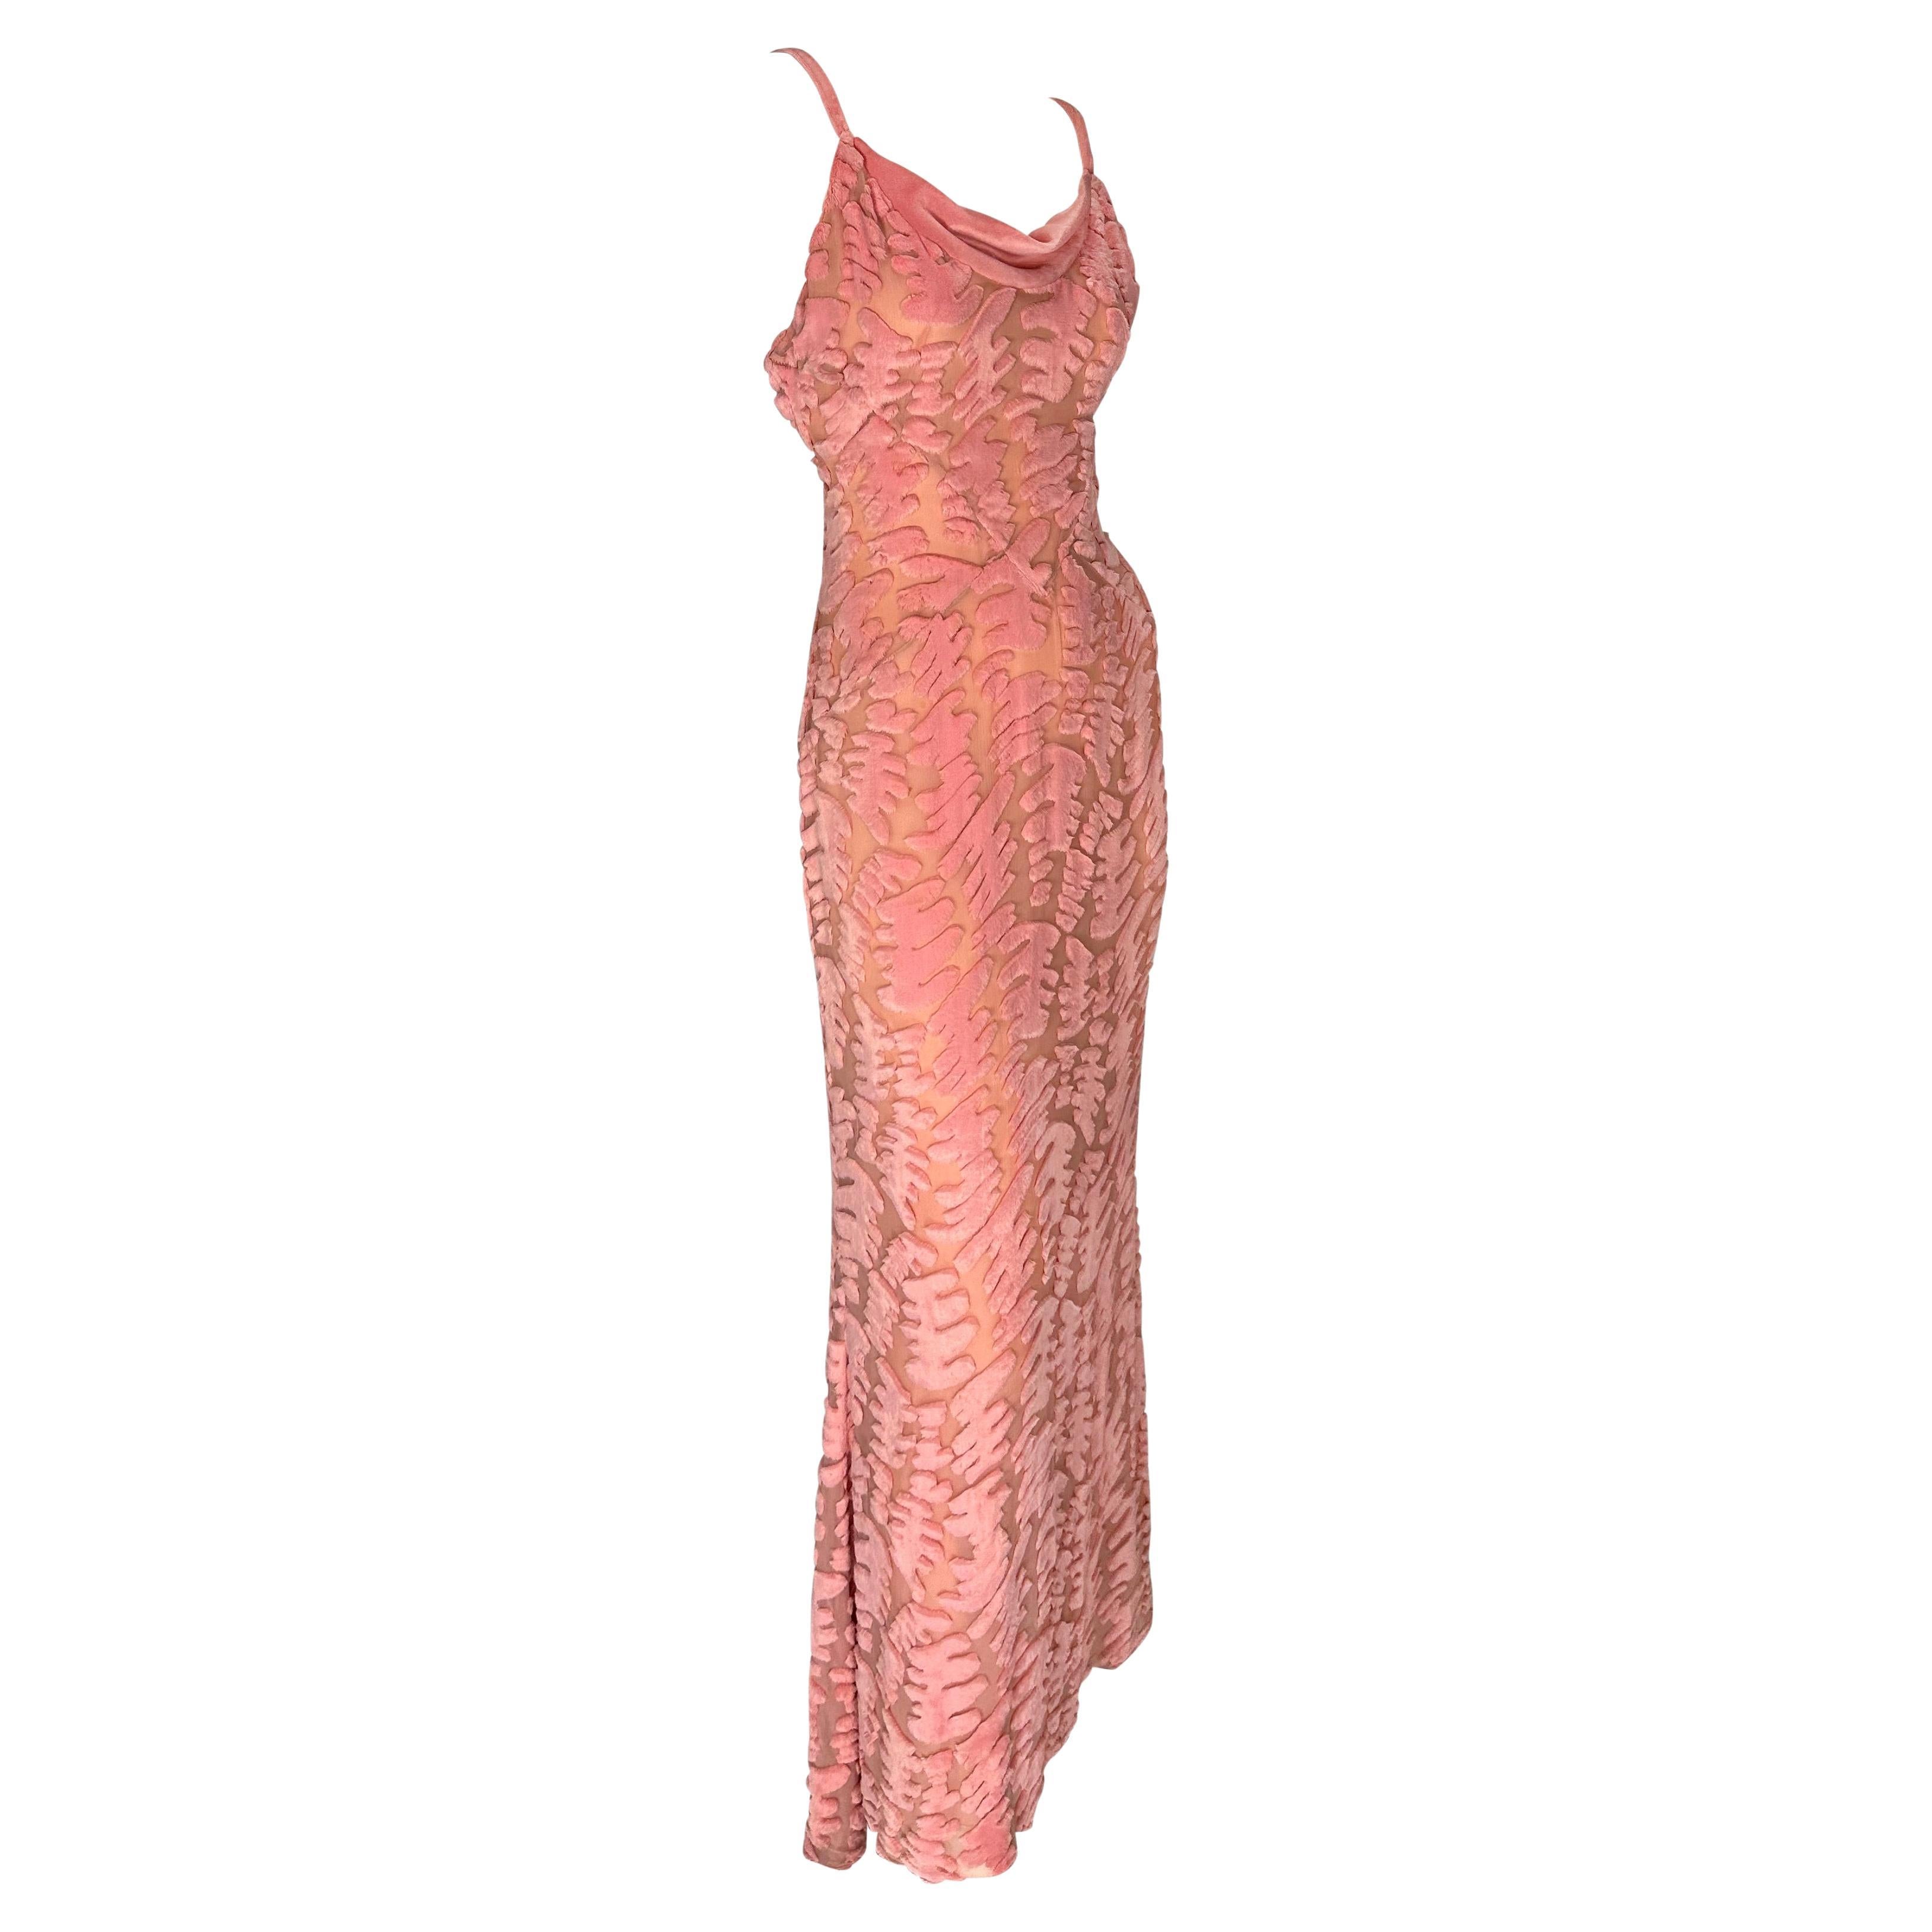 F/W 1997 Chloé by Karl Lagerfeld Pink Sheer Chiffon Abstract Chenille Gown For Sale 5